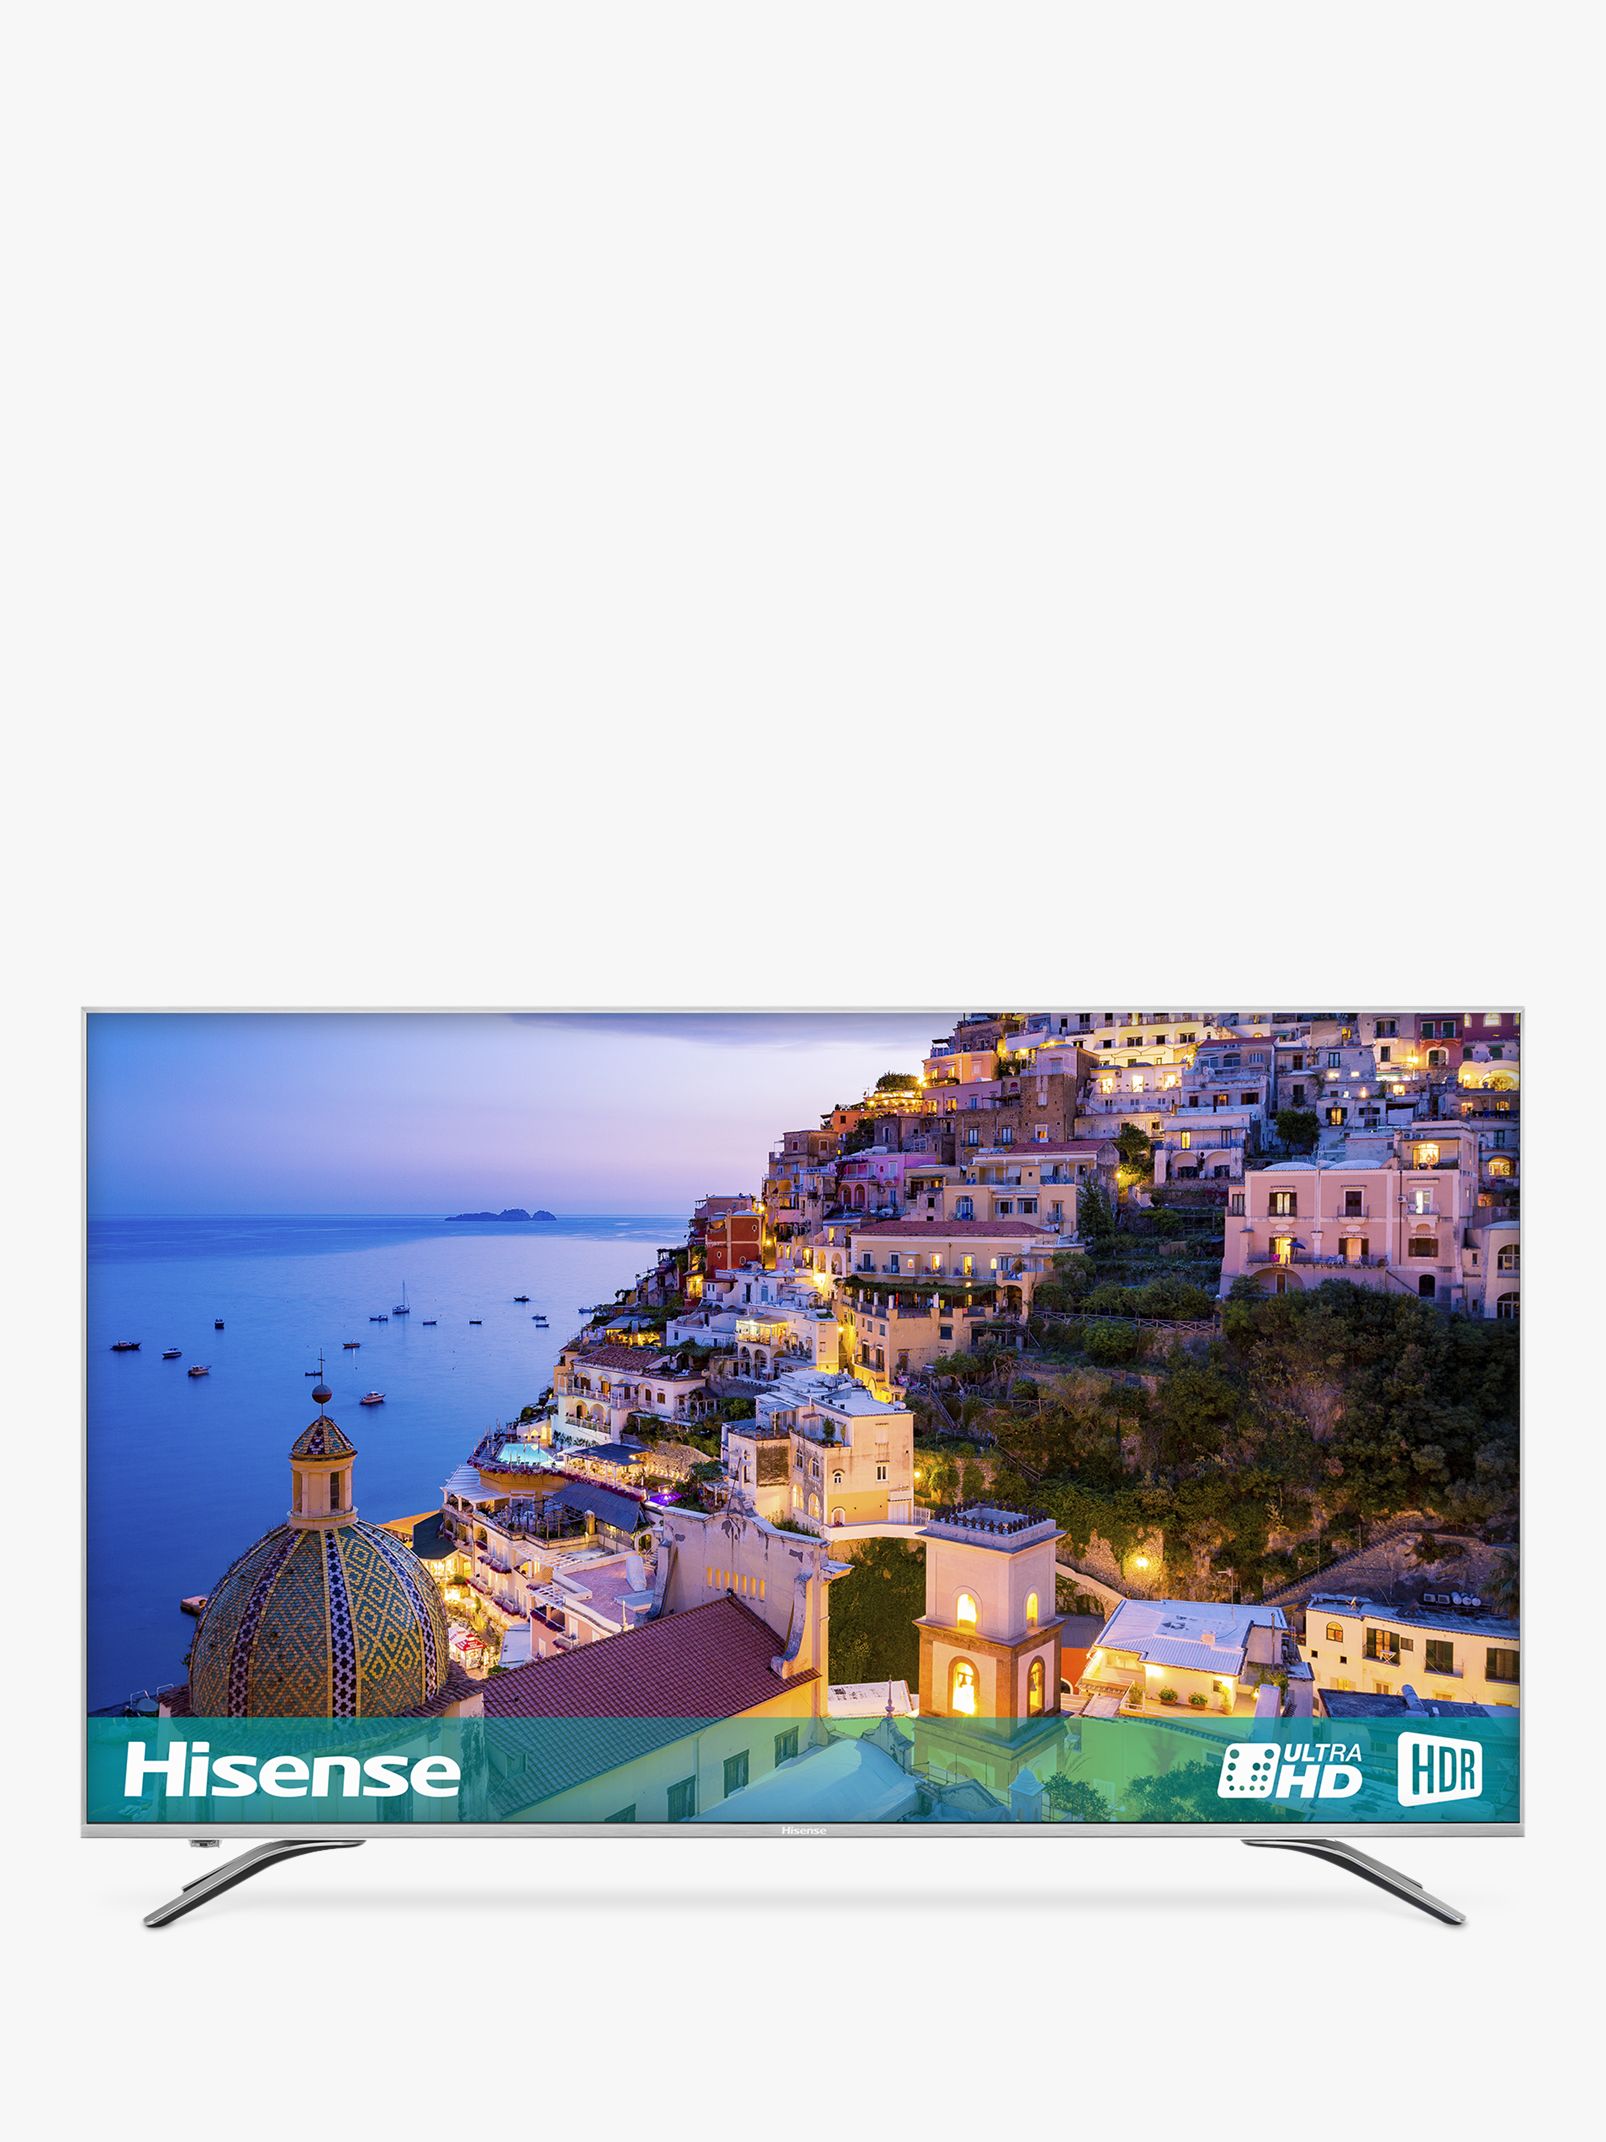 Hisense 55A6500 LED HDR 4K Ultra HD Smart TV, 55 with Freeview Play, Black/Silver